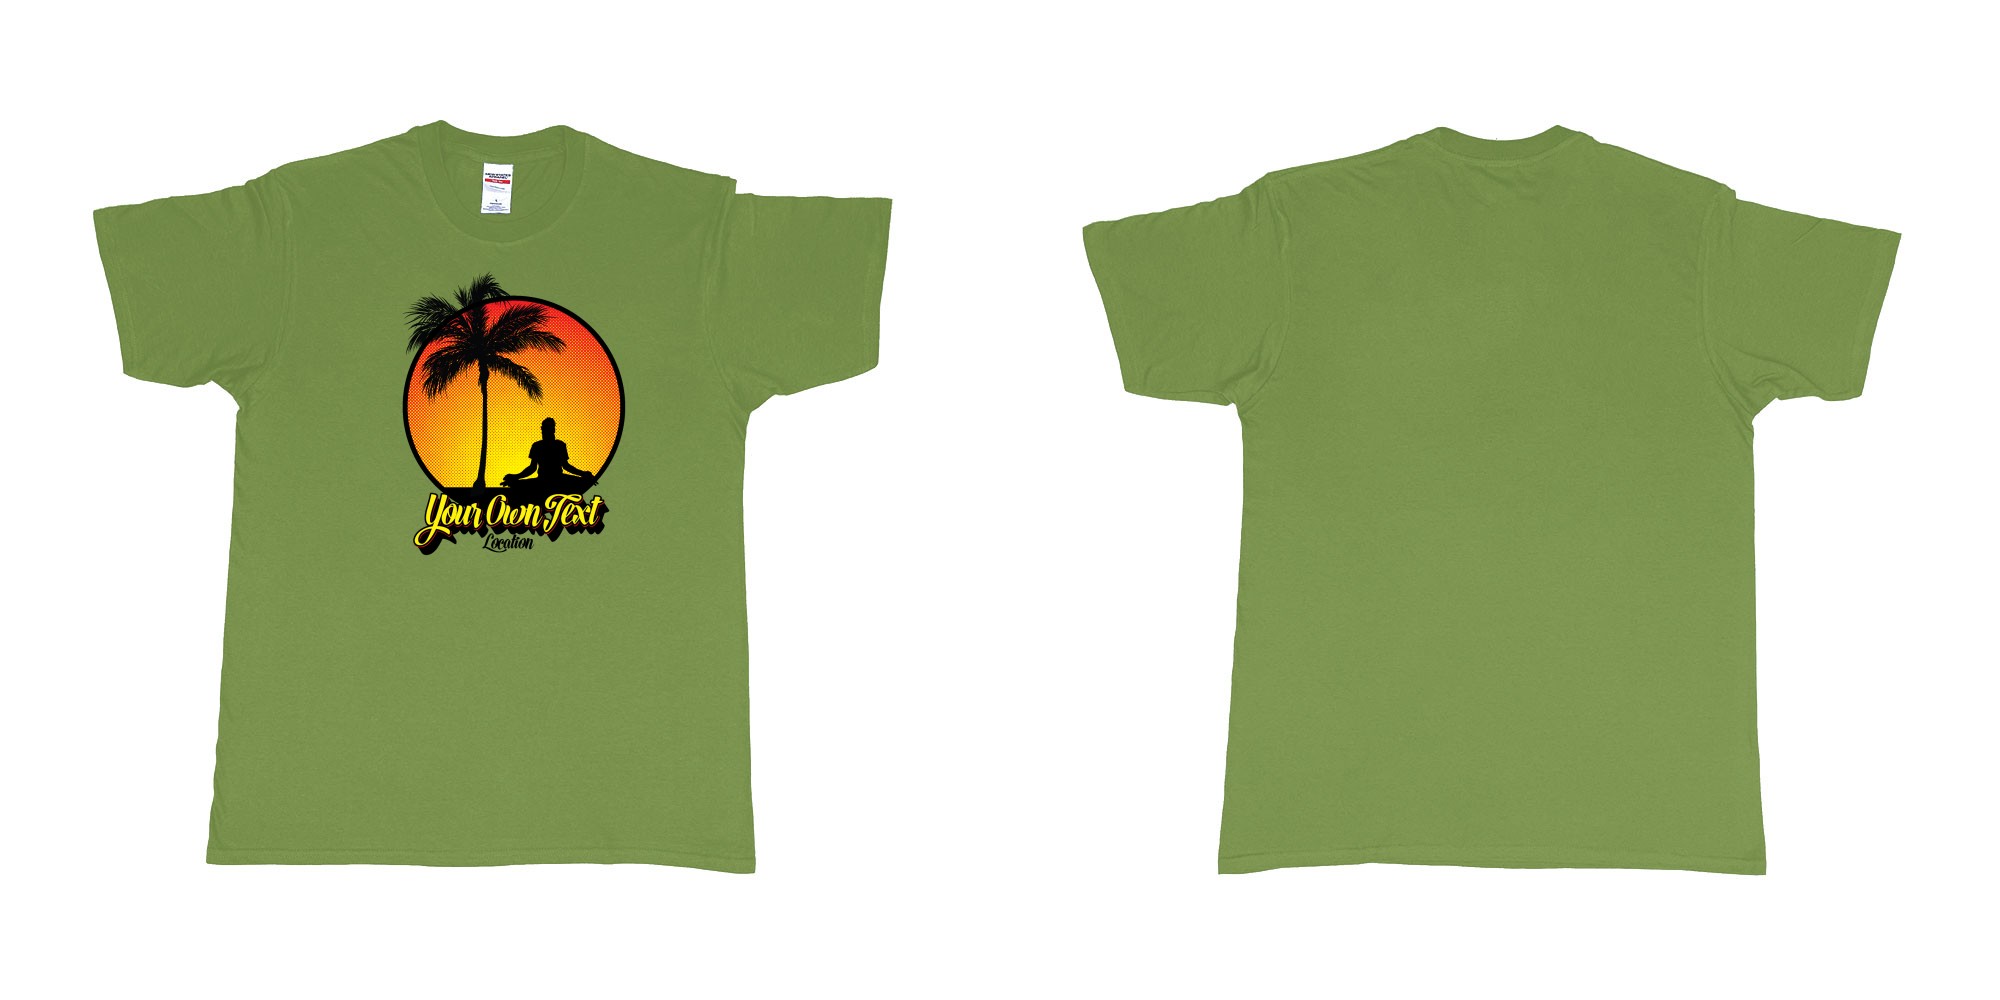 Custom tshirt design yoga palmtree sunset halftone your own text location screen printing bali in fabric color military-green choice your own text made in Bali by The Pirate Way